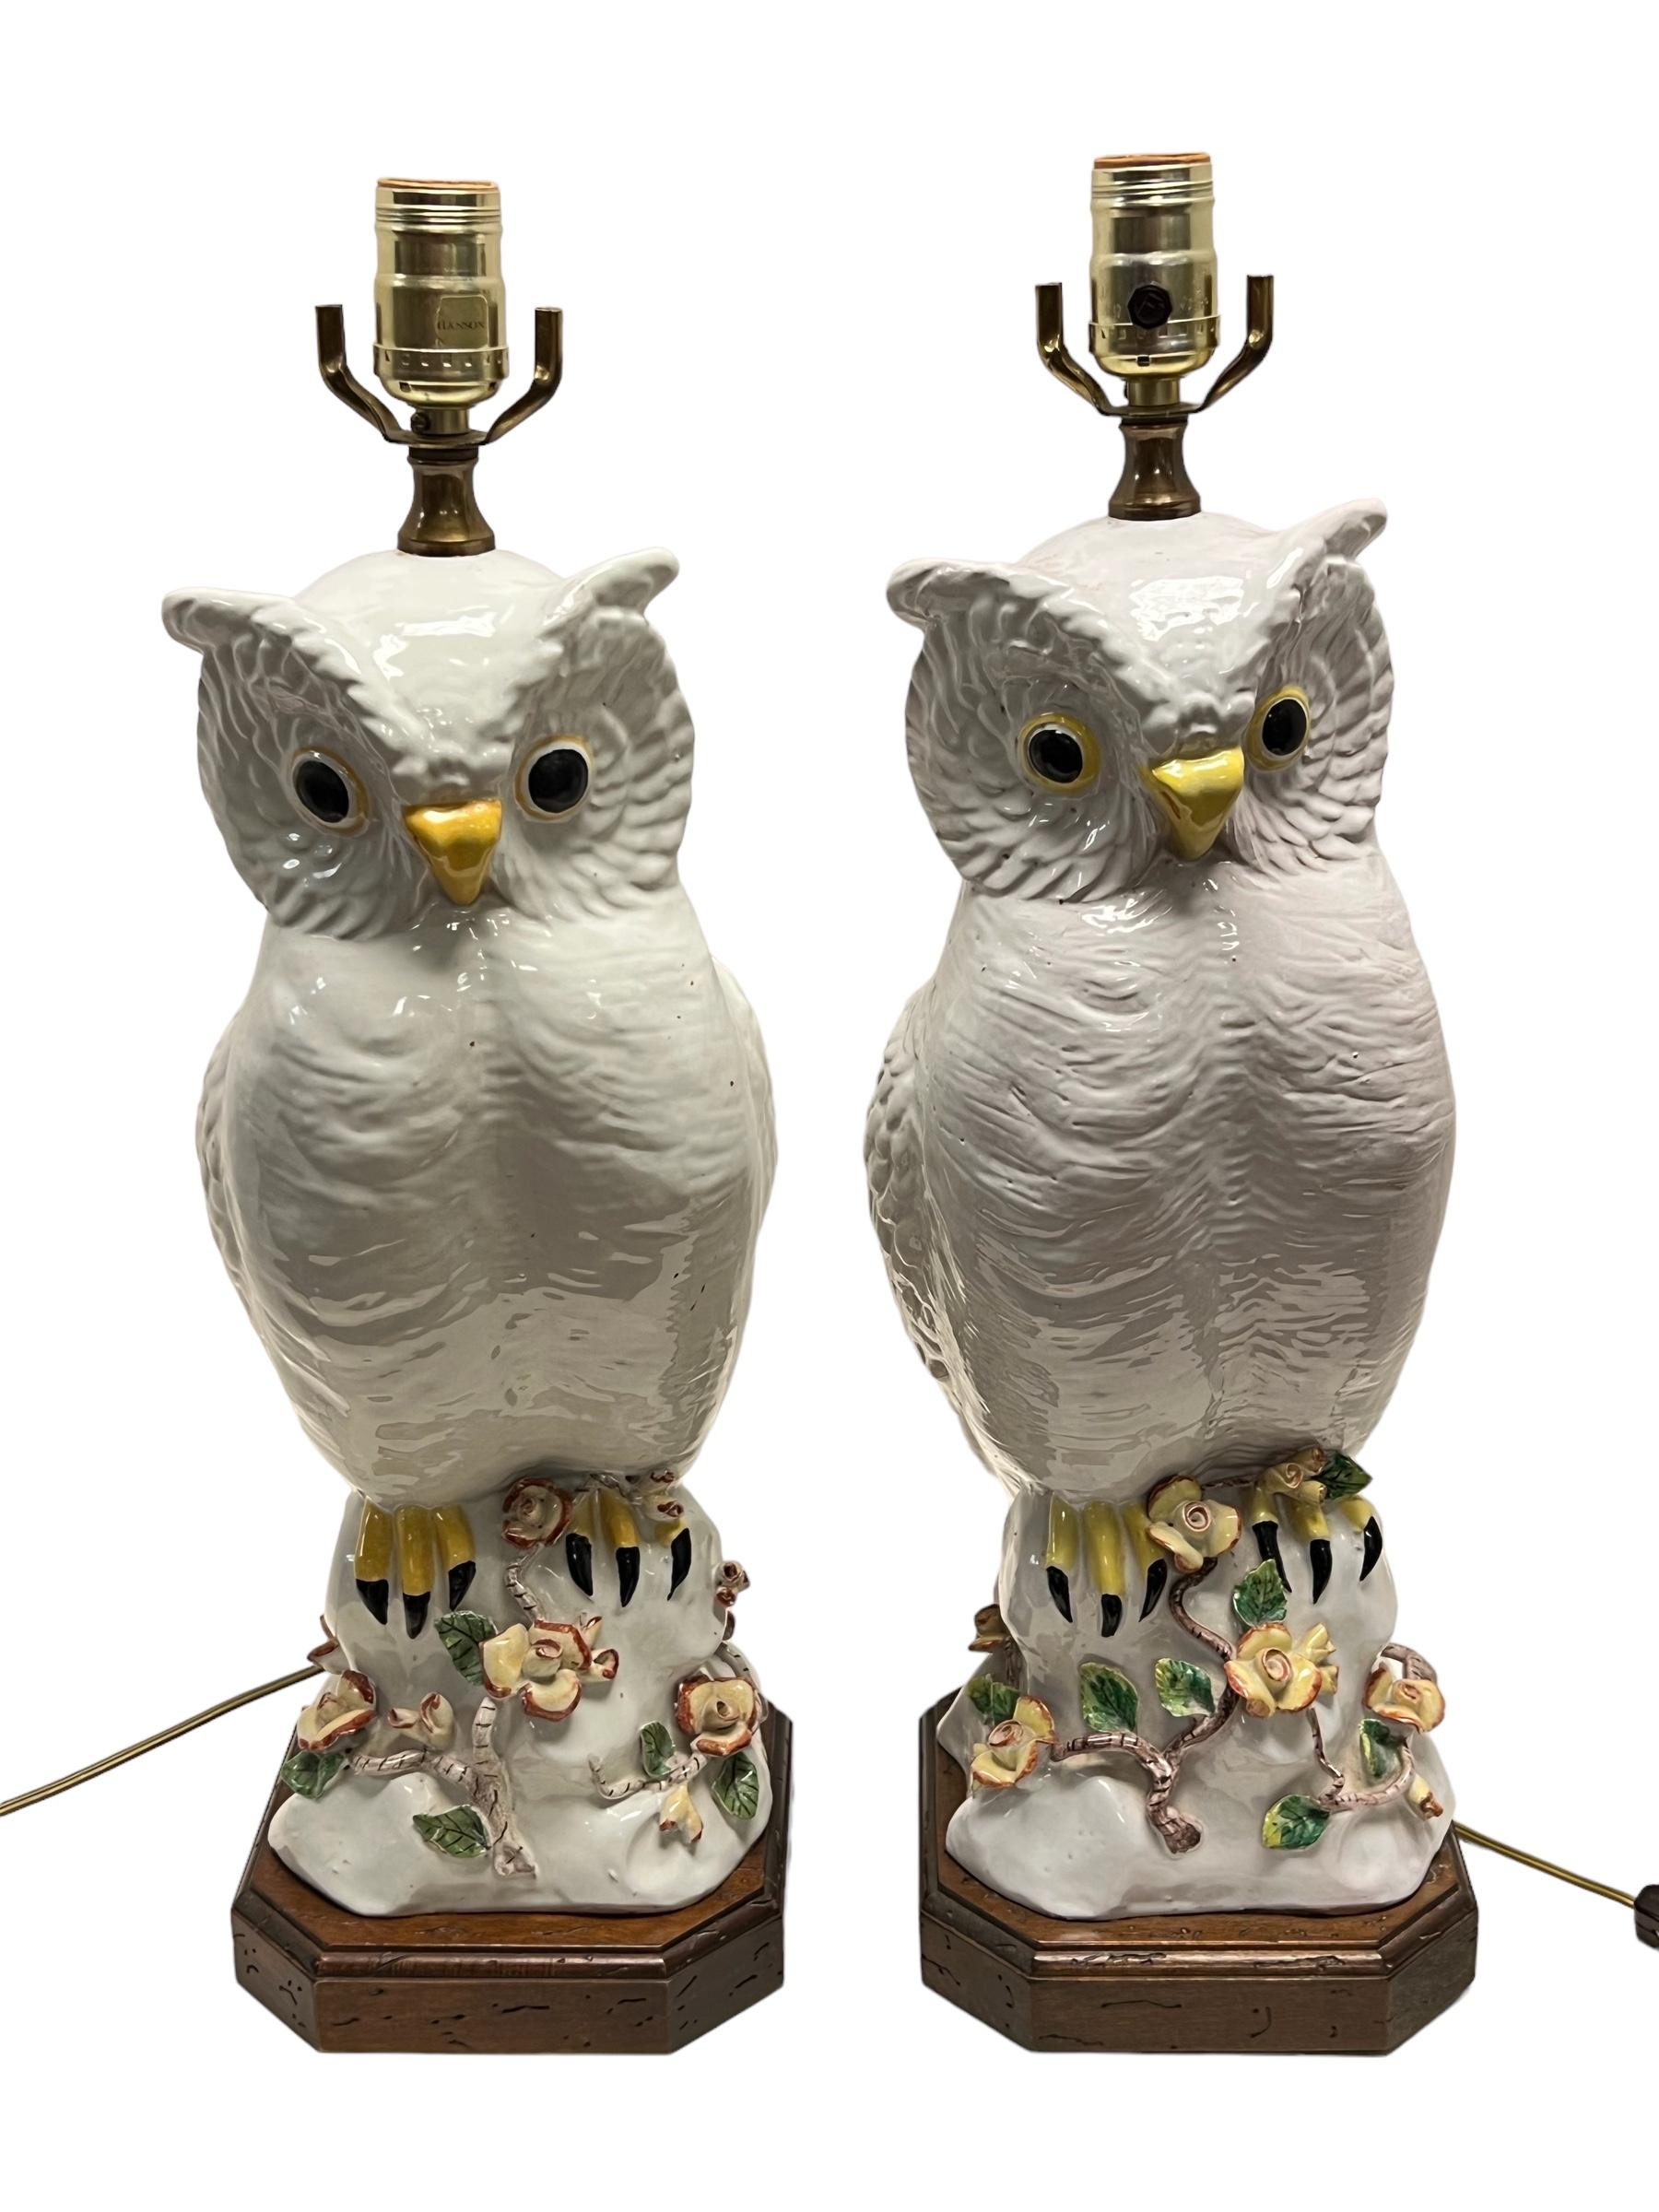 Pair of mid-century modern glazed ceramic owls mounted as table lamps with carved wooden pedestals, believed to be of Italian origin.  Ready for use.